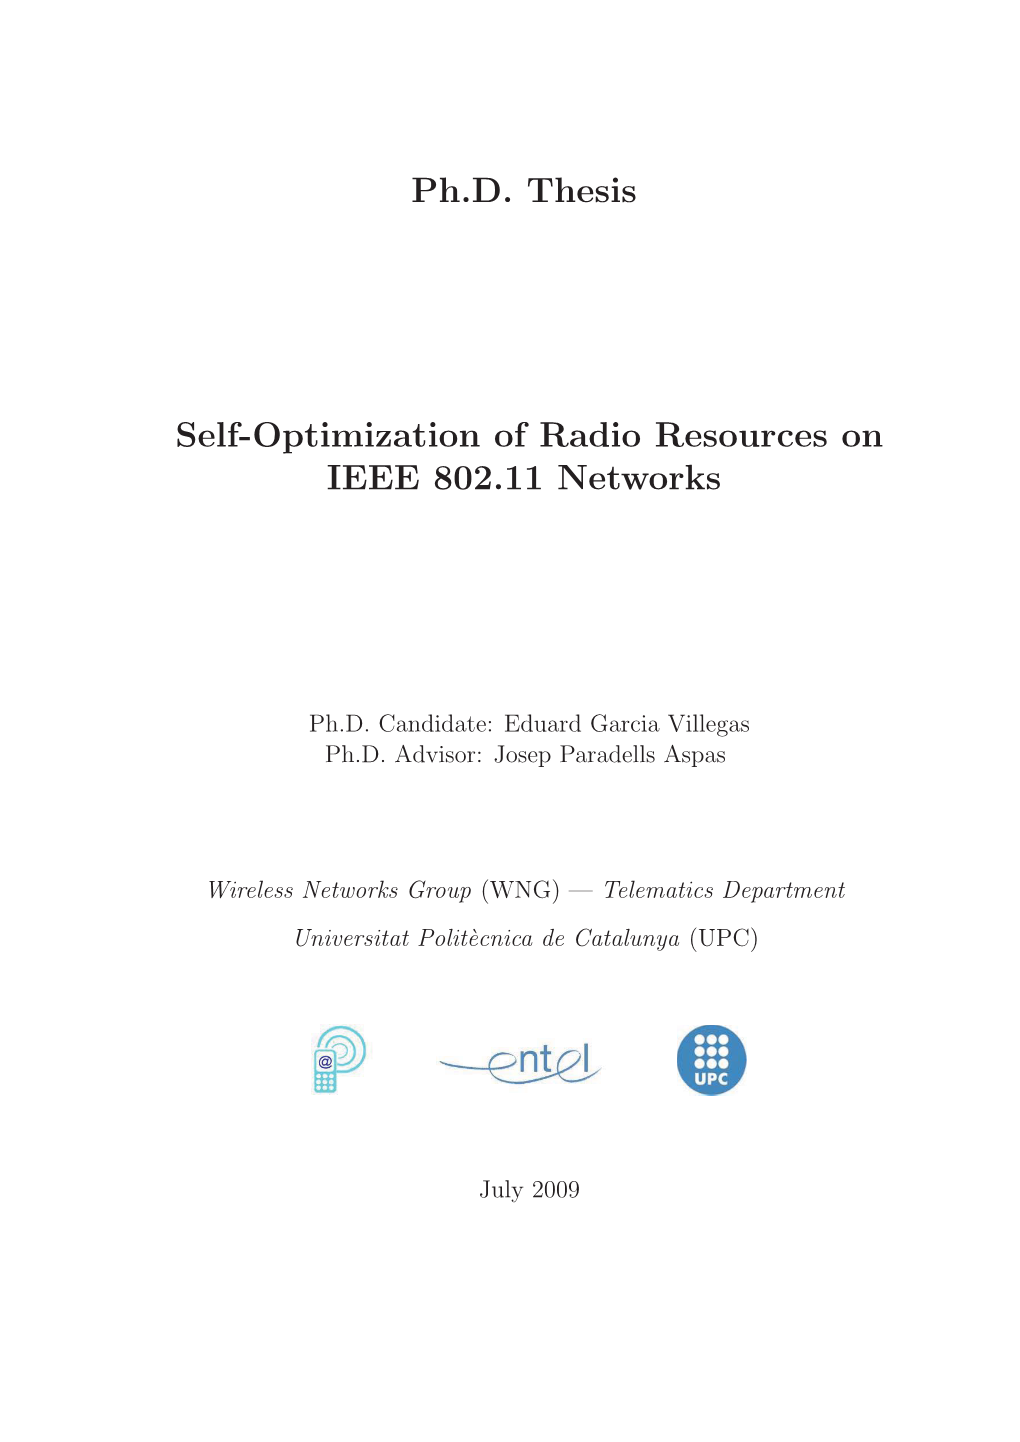 Ph.D. Thesis Self-Optimization of Radio Resources on IEEE 802.11